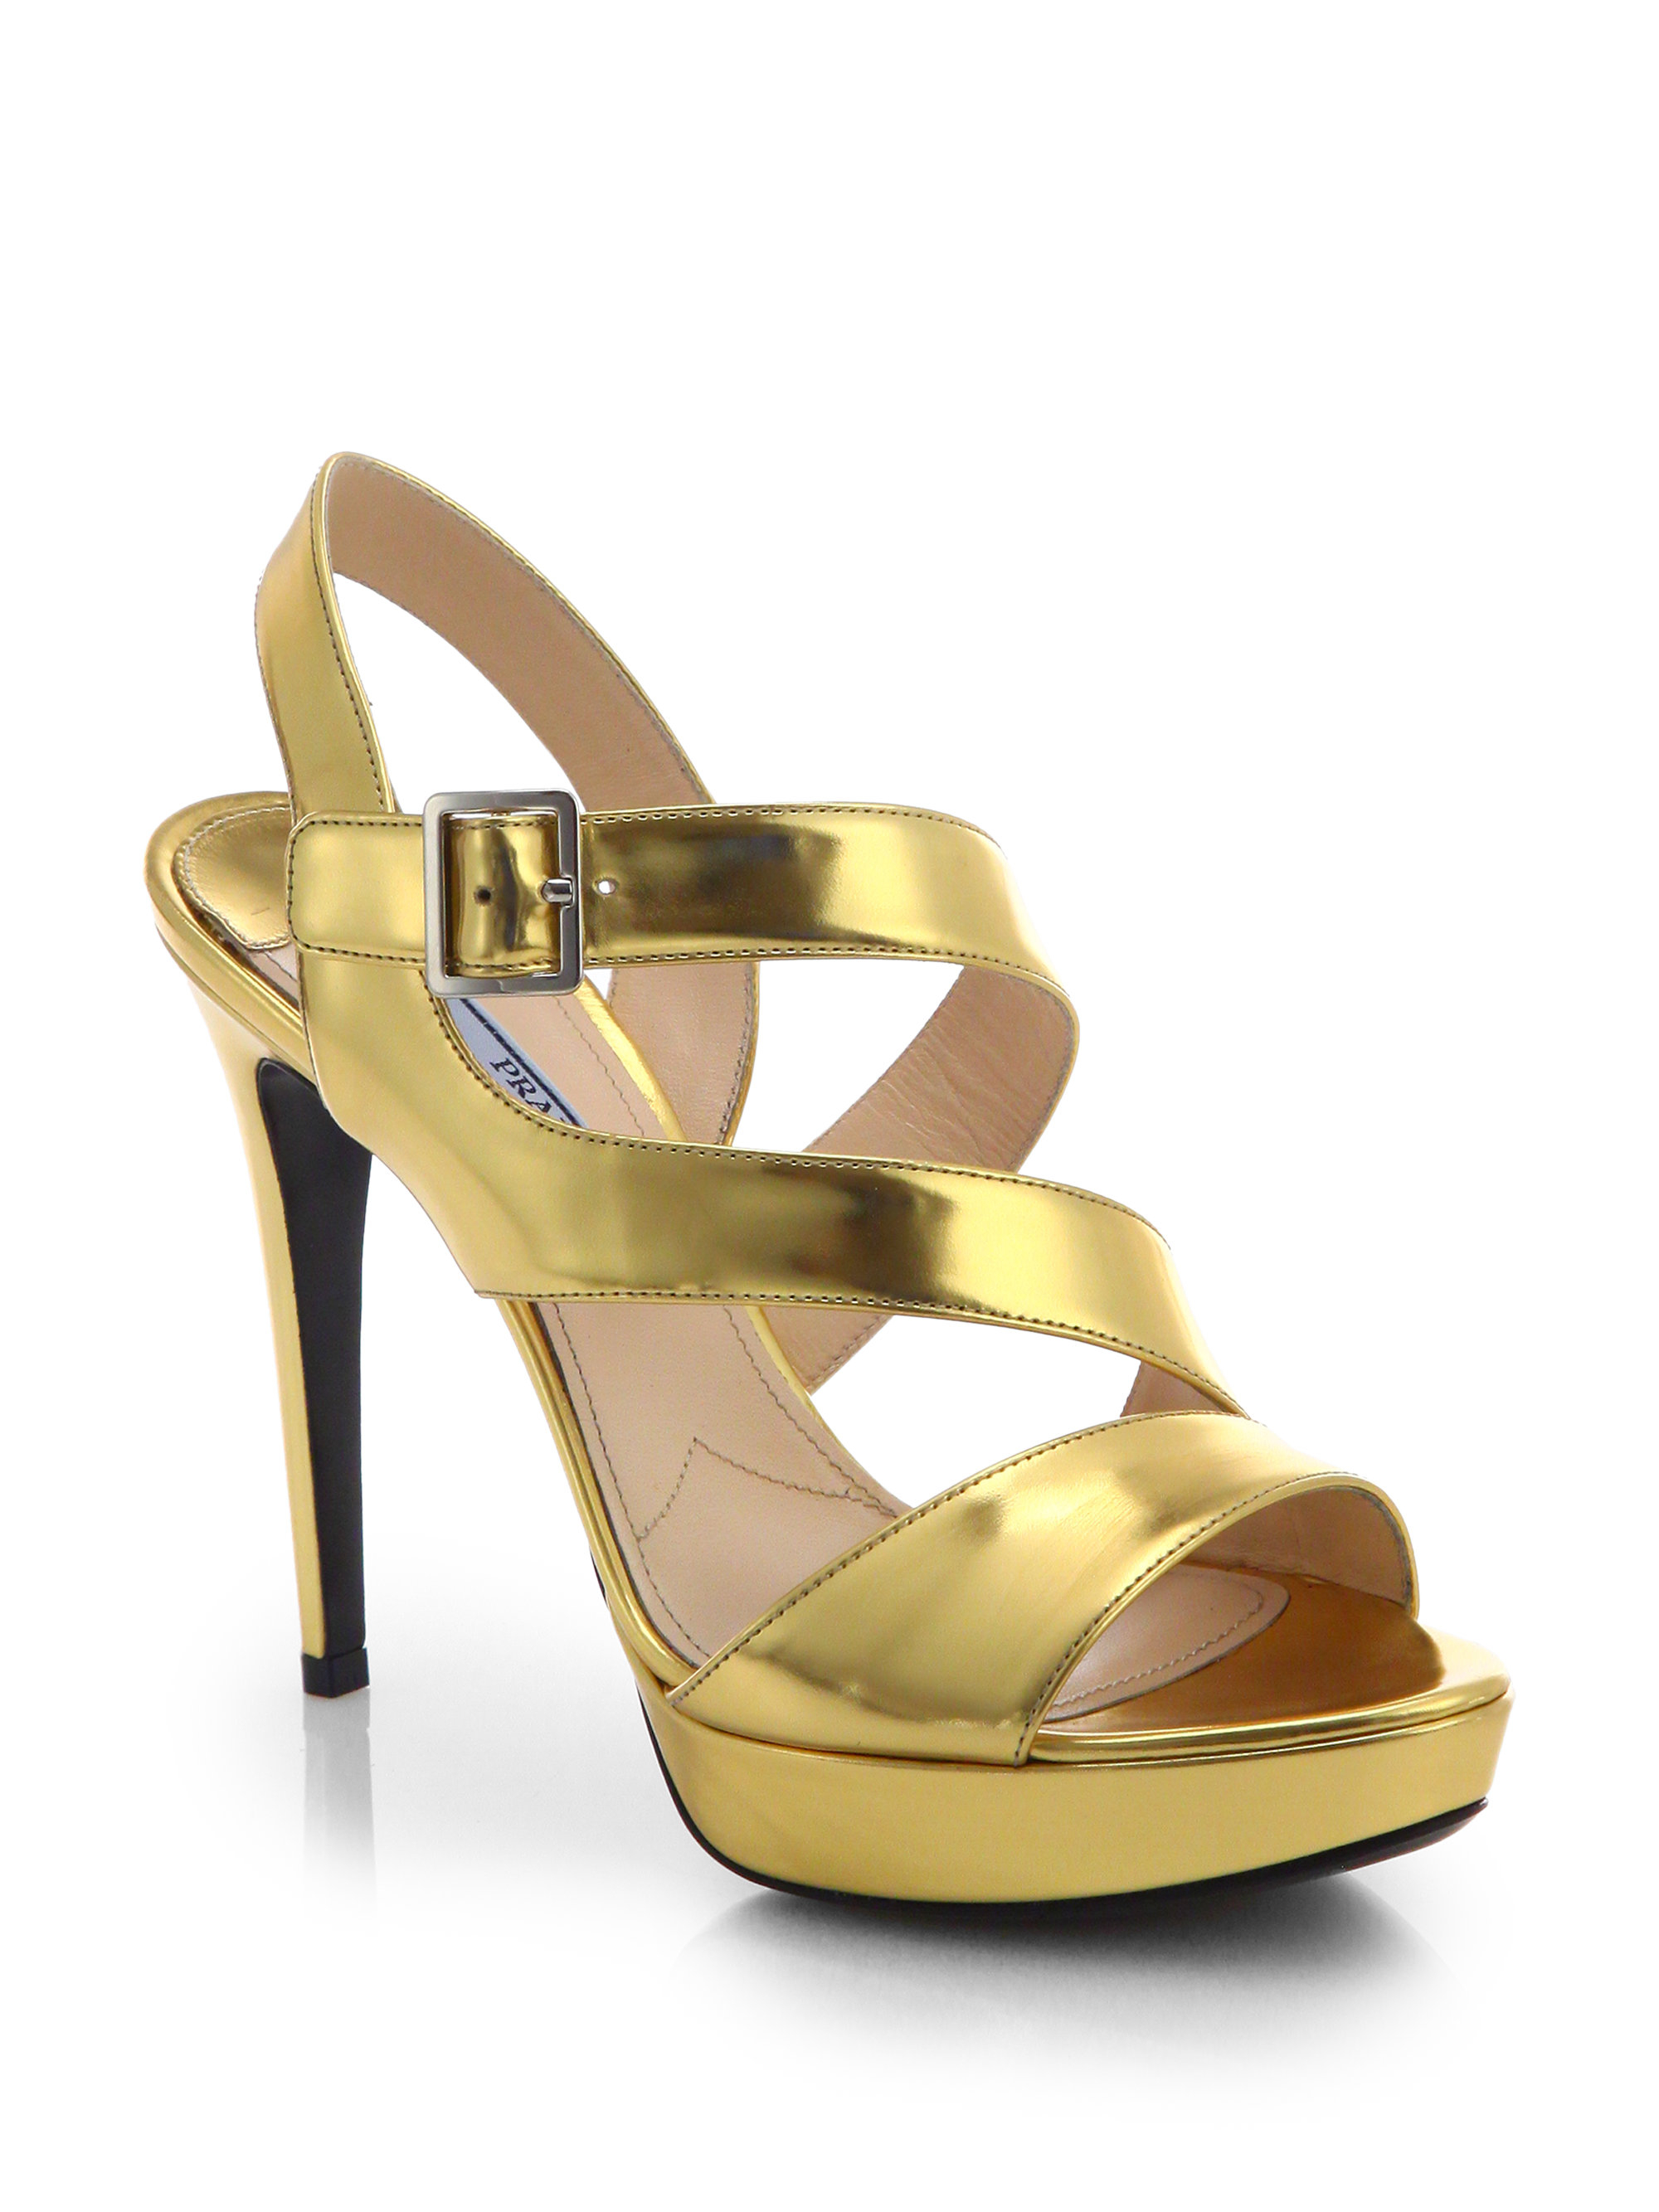 Prada Strappy Metallic Leather Sandals in Gold (ORO-GOLD) | Lyst  